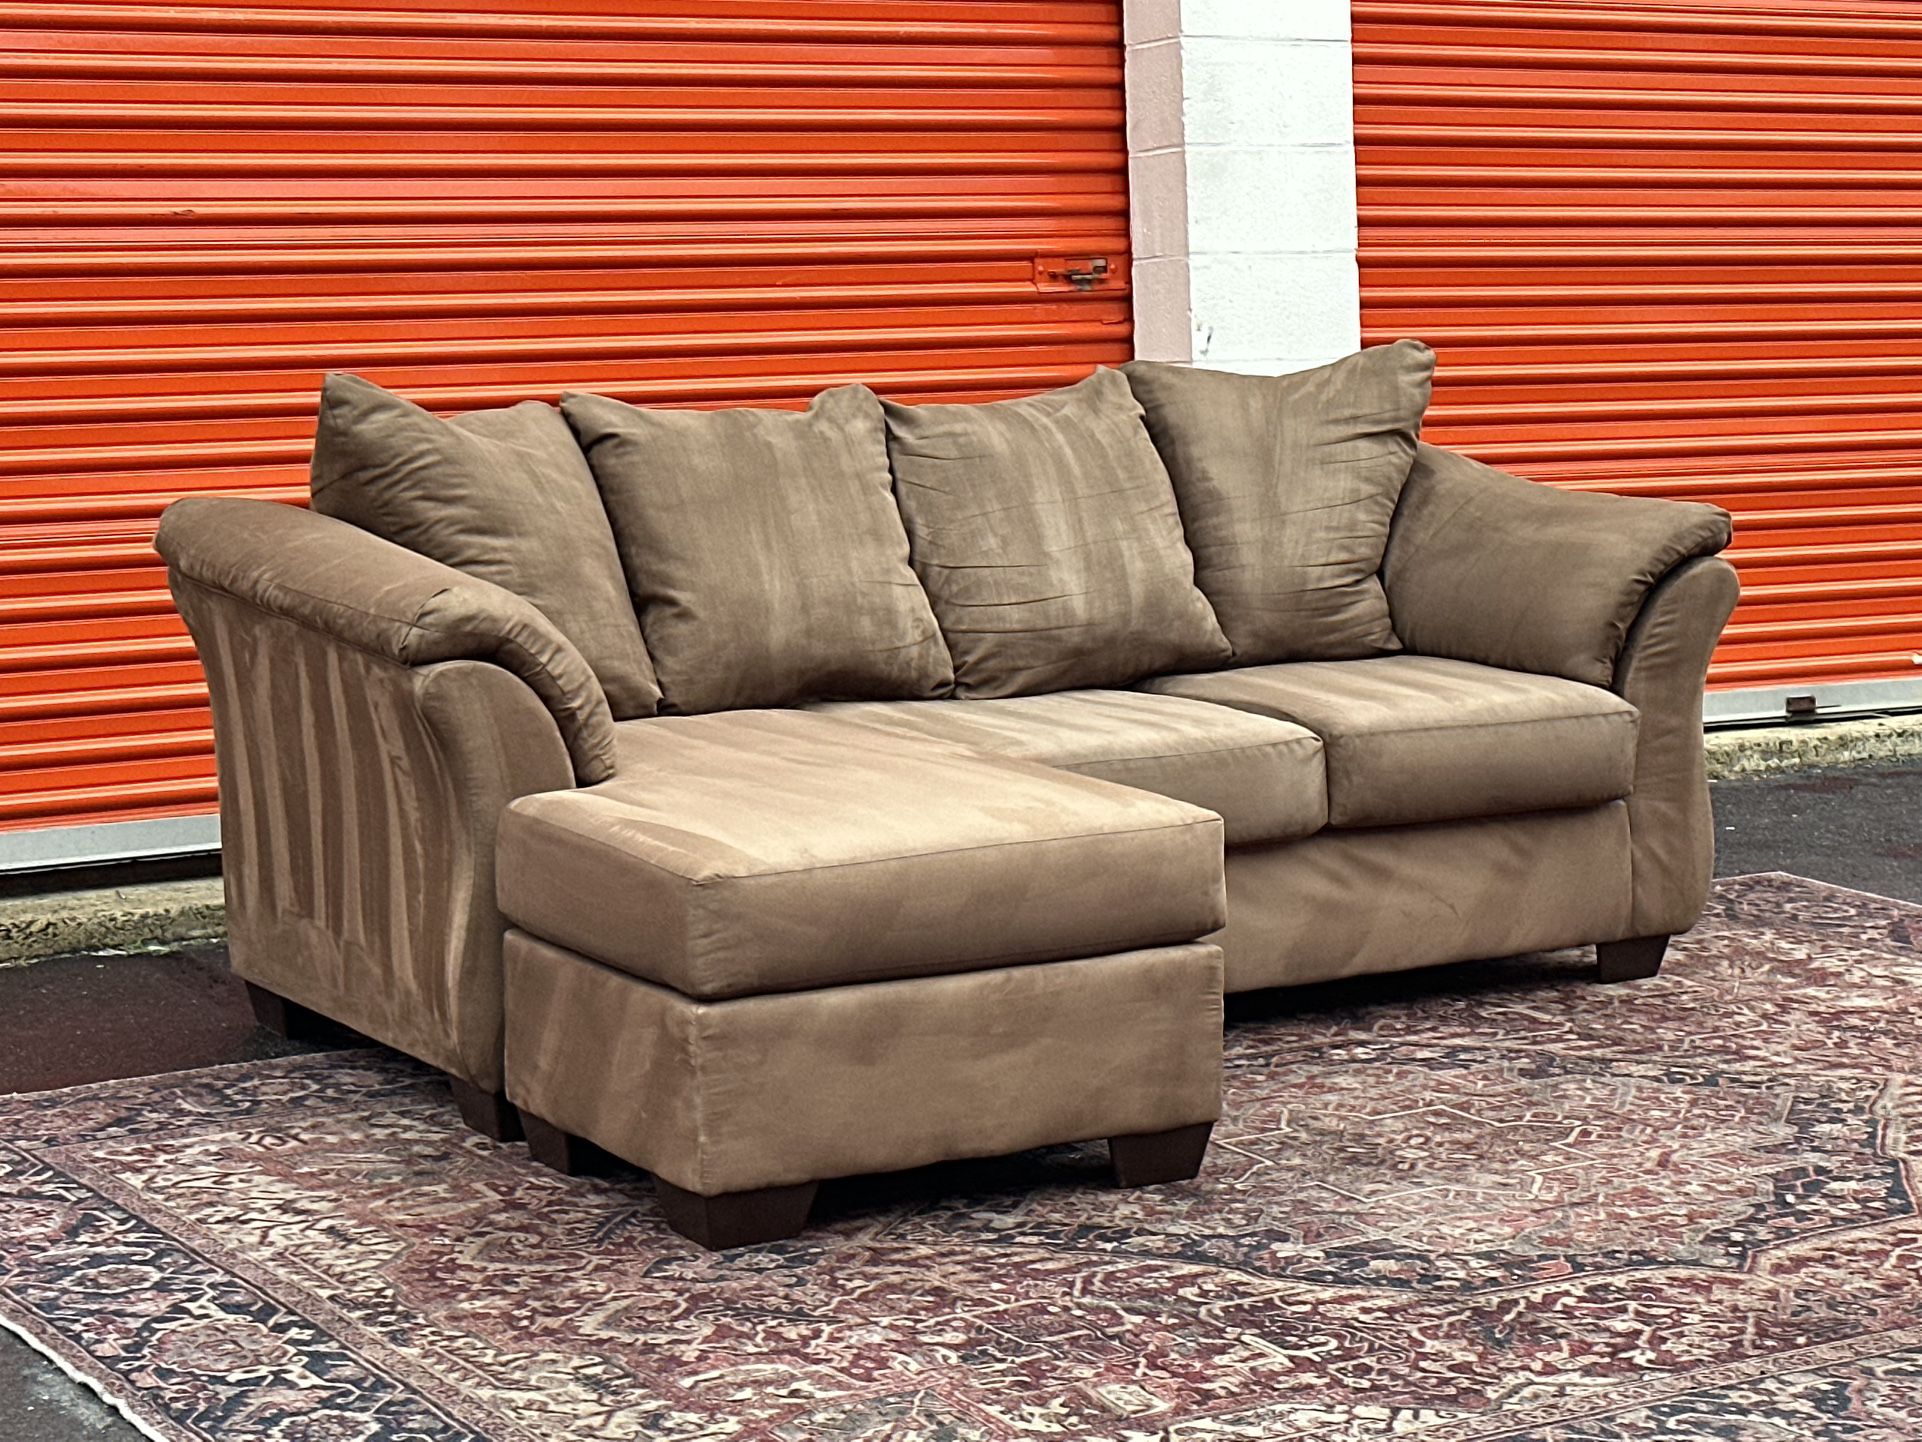 Ashley’s L Shape Reversible Chaise Sectional Couch Set Free Curbside Delivery 